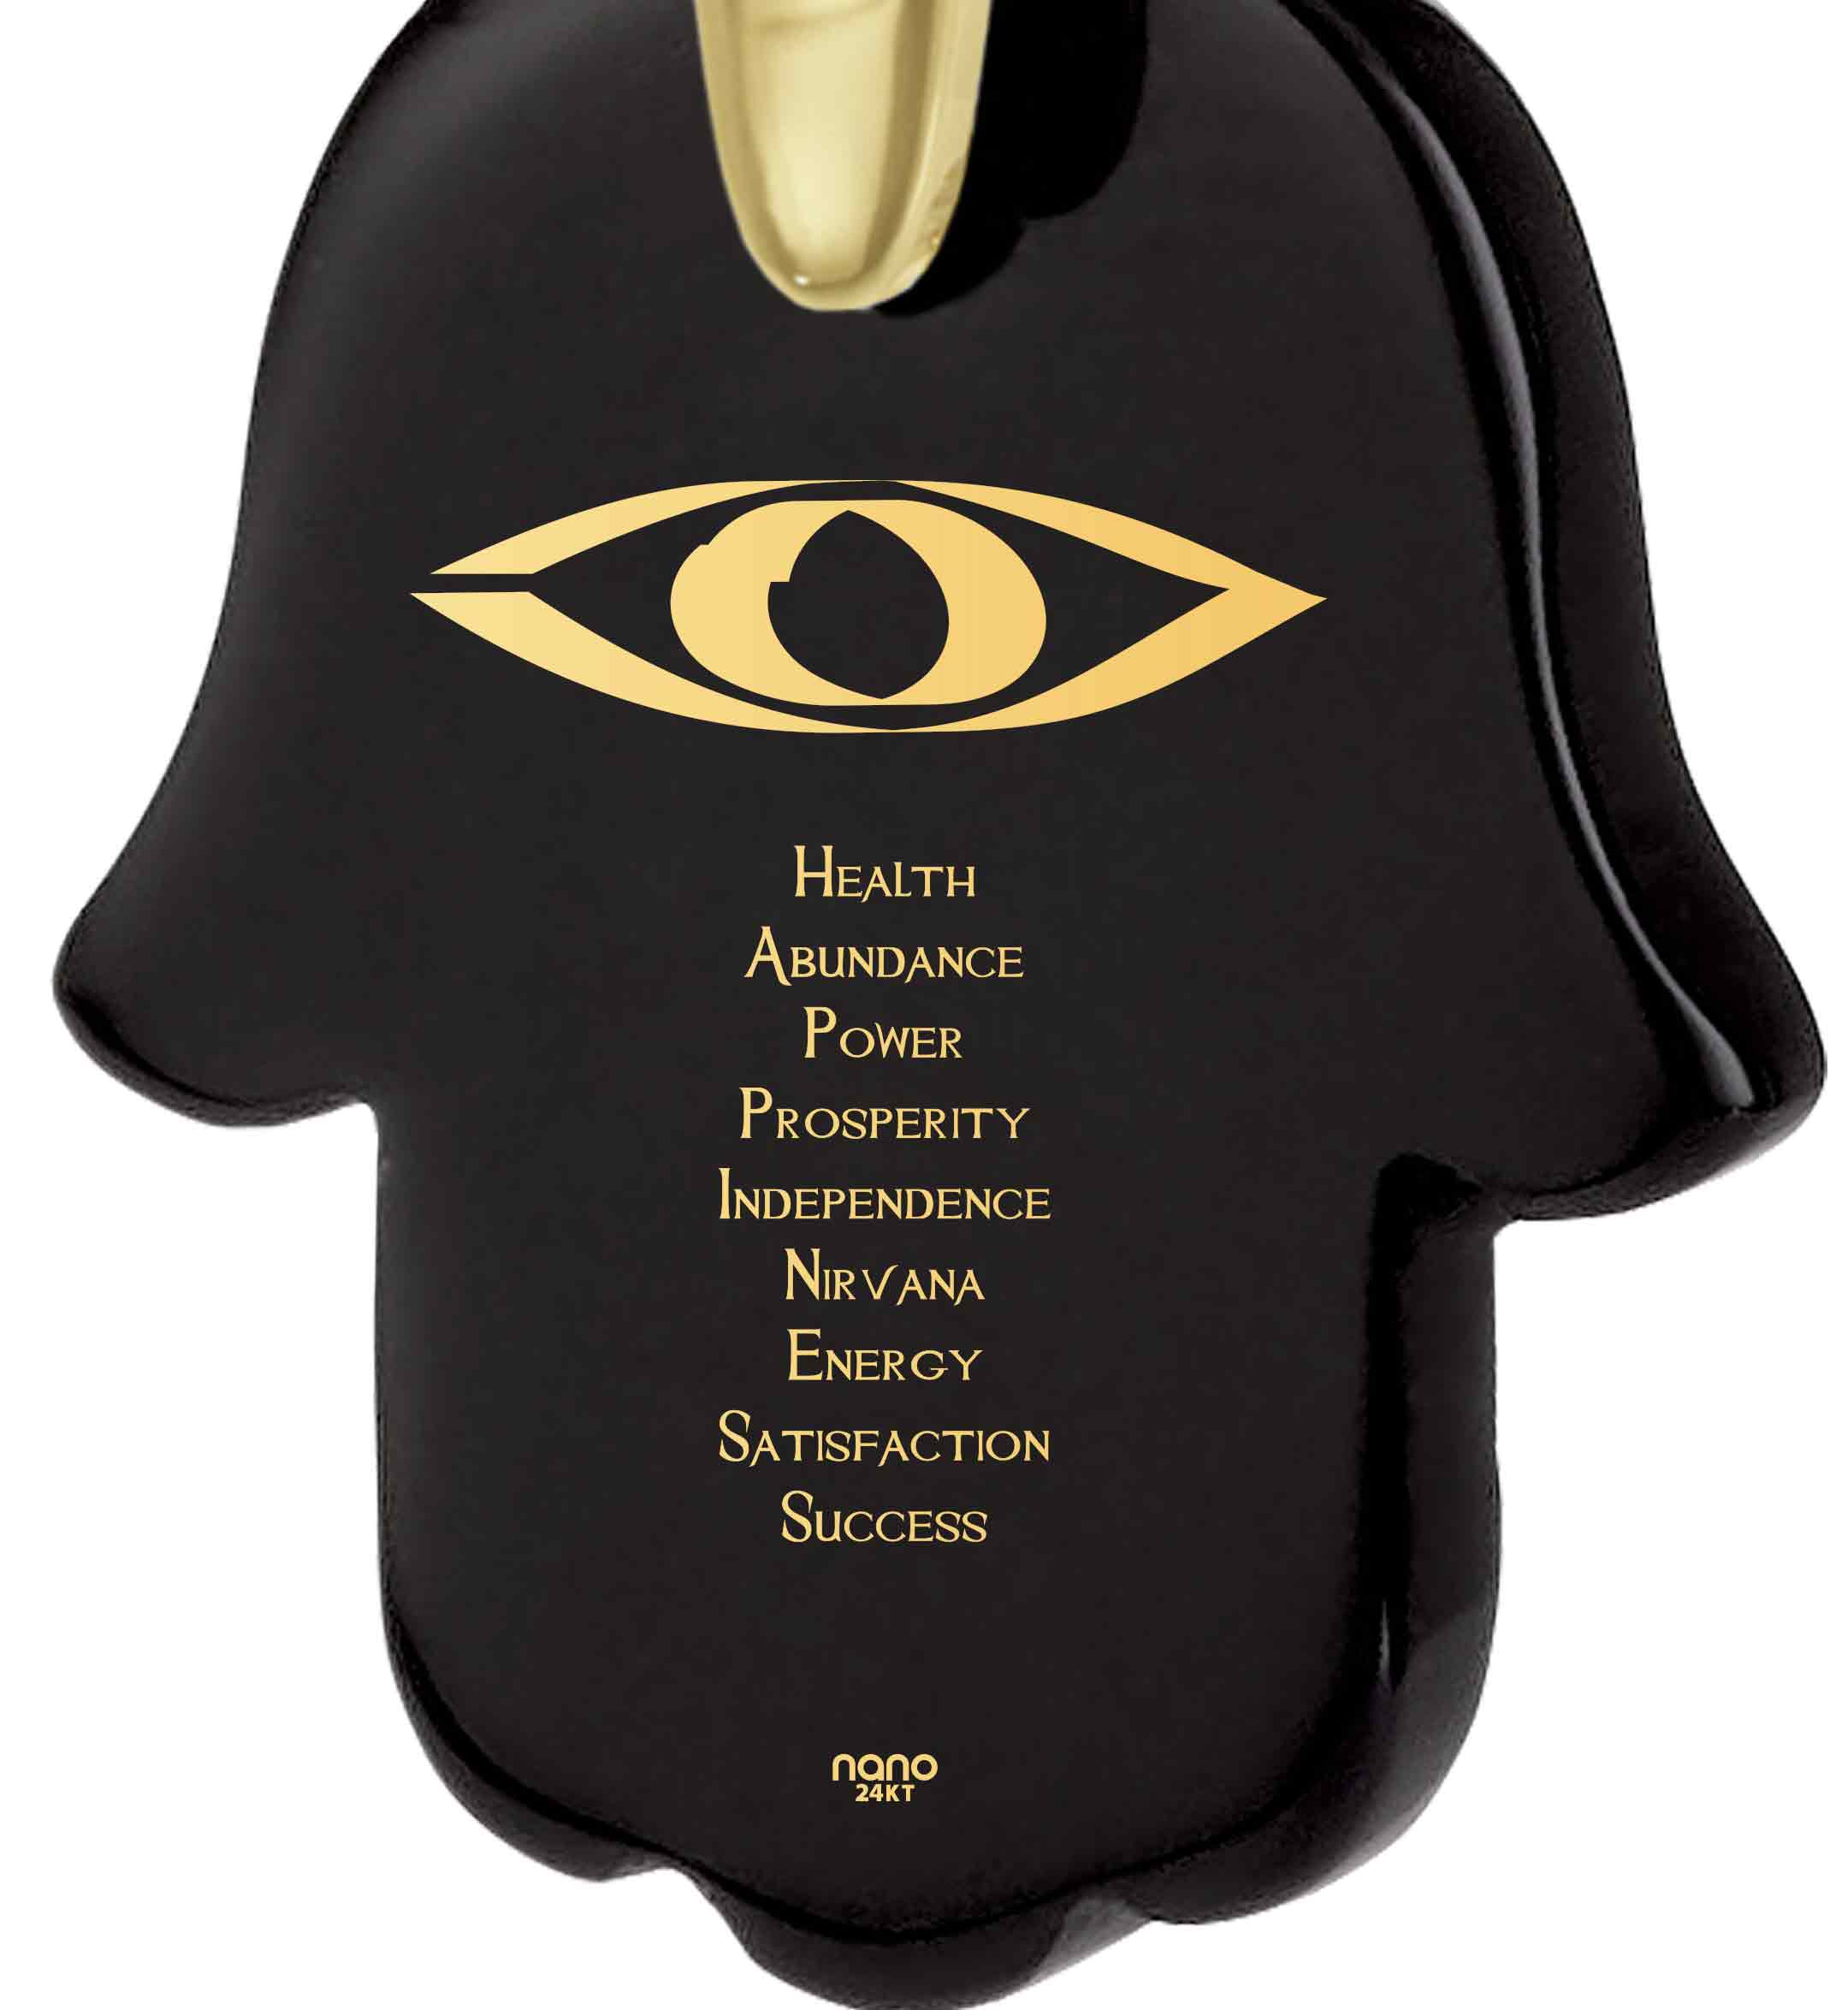 Hamsa Necklace Happiness Acronym Charm Pendant 24k Gold Inscribed featuring a black hamsa charm with an eye symbol, accompanied by three silver tags engraved with words and symbols, against a white background.